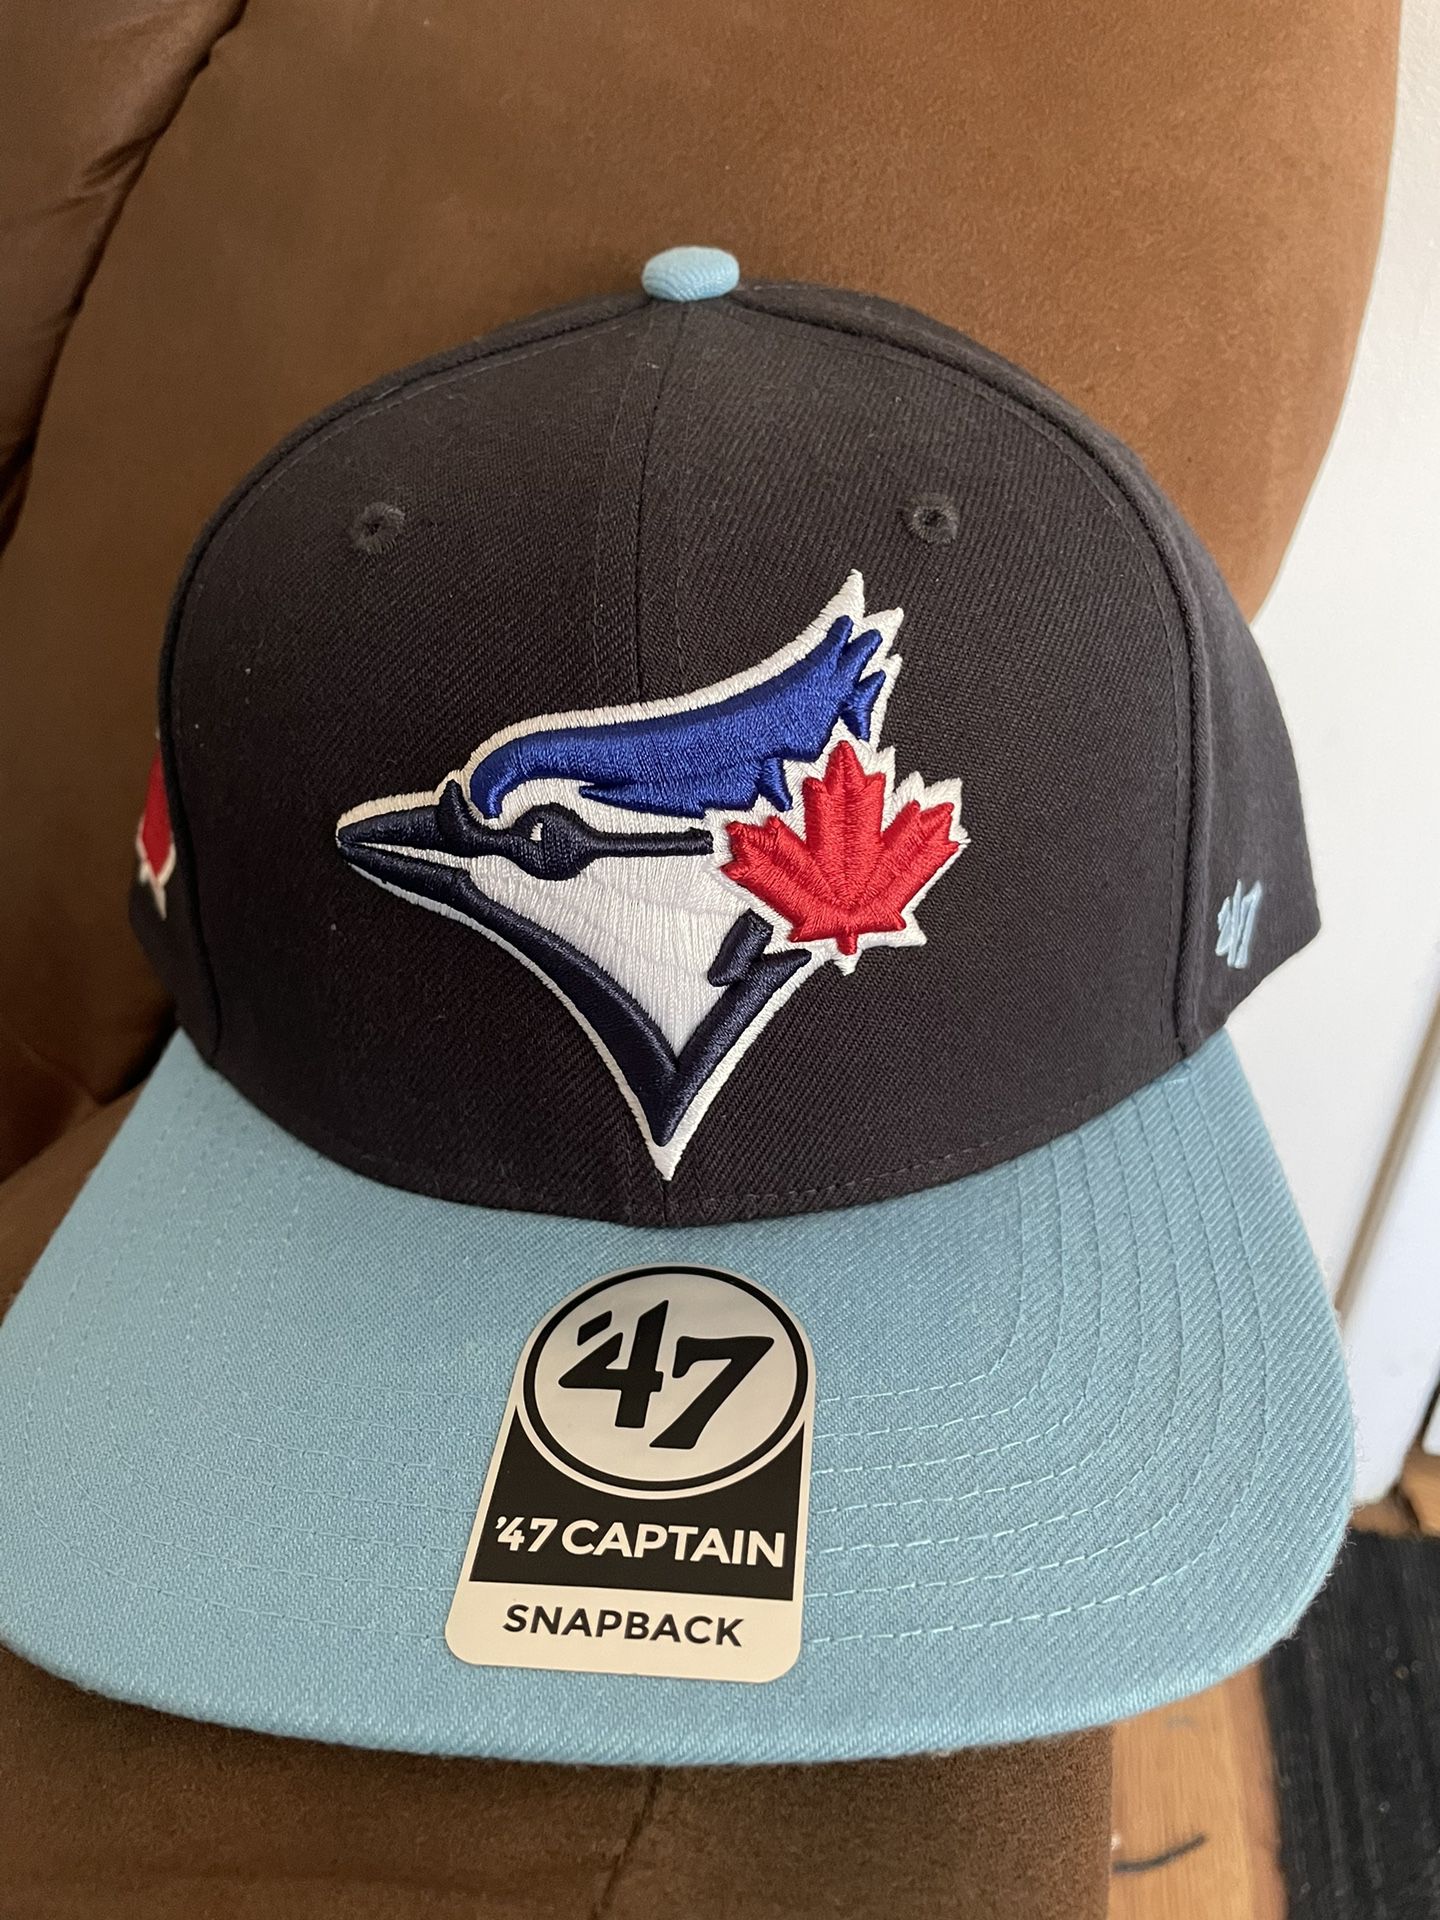 Toronto Blue Jays 47 Brand MLB SnapBack Hat for Sale in Burbank, IL -  OfferUp